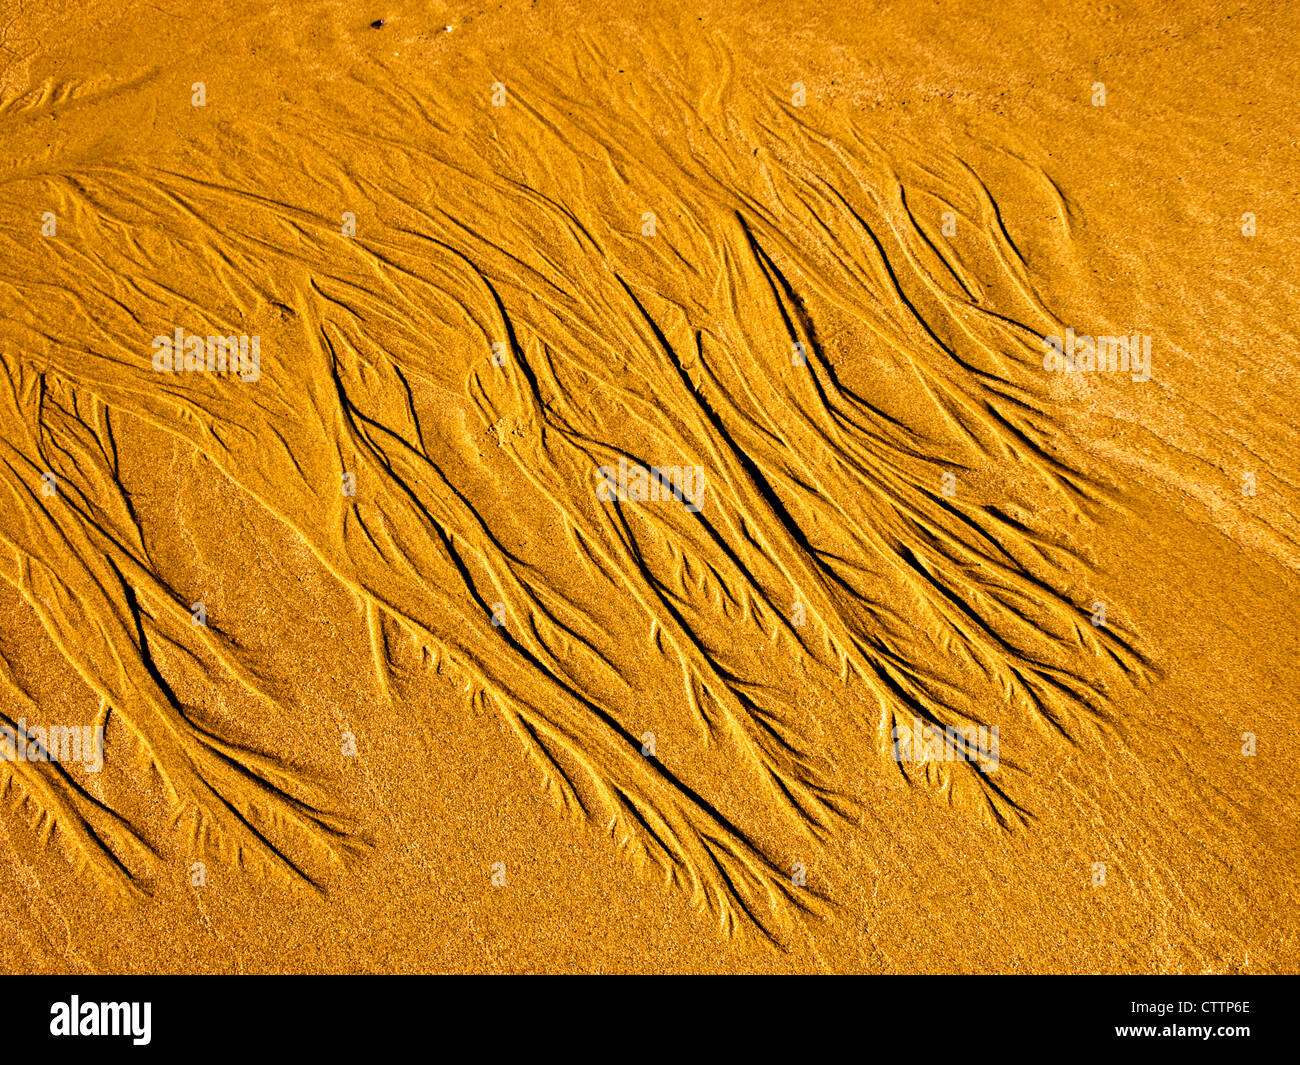 Ridges in beach sand made by retreating tide Stock Photo